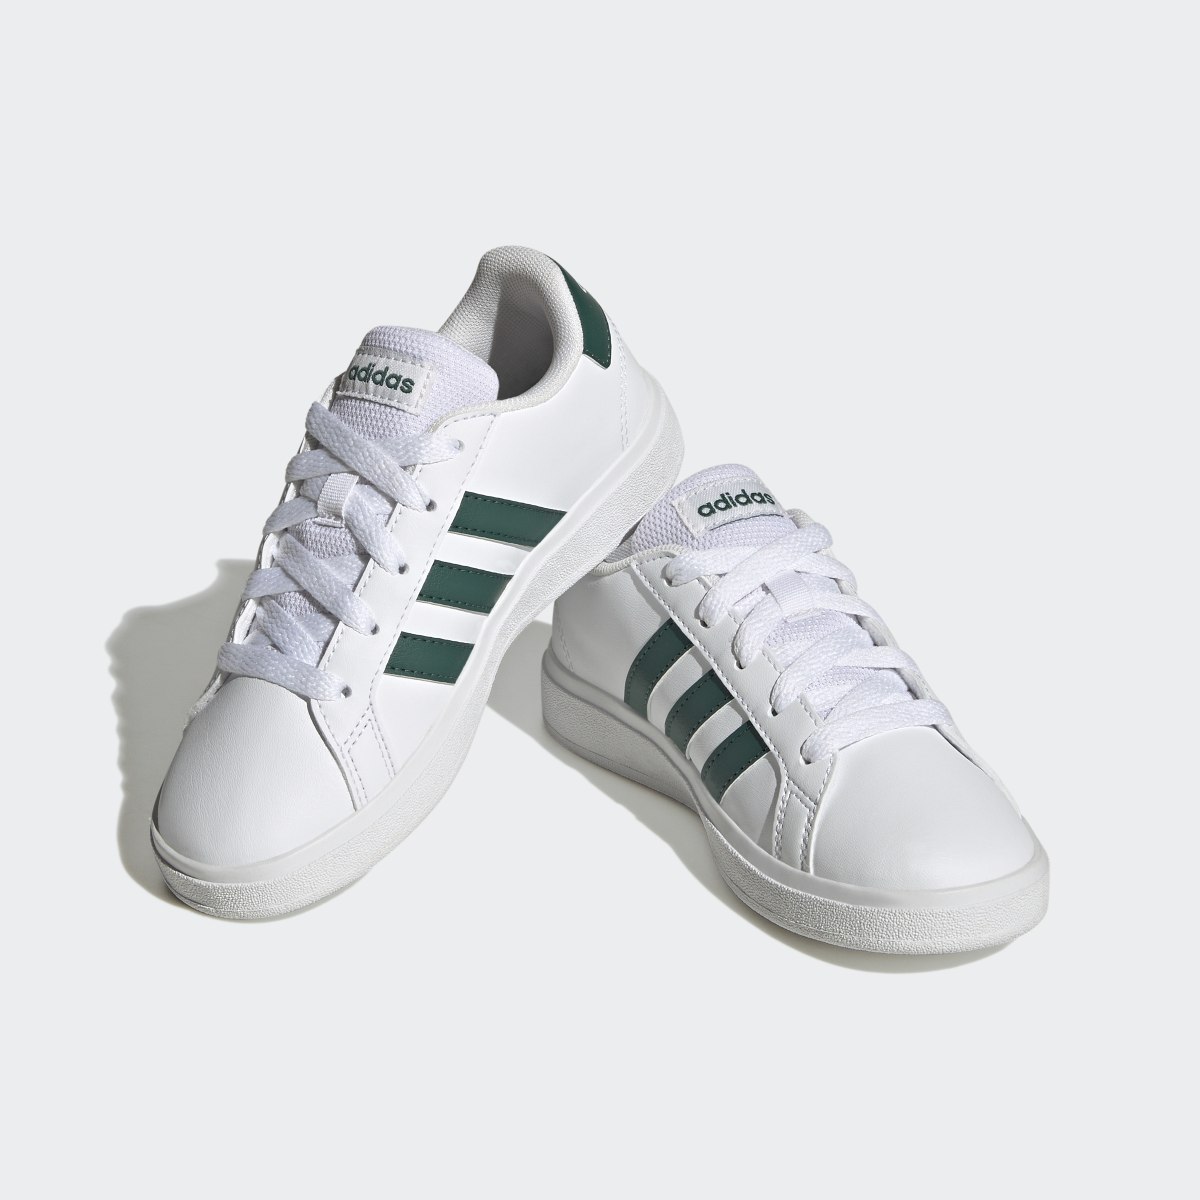 Adidas Grand Court Lifestyle Tennis Lace-Up Schuh. 5